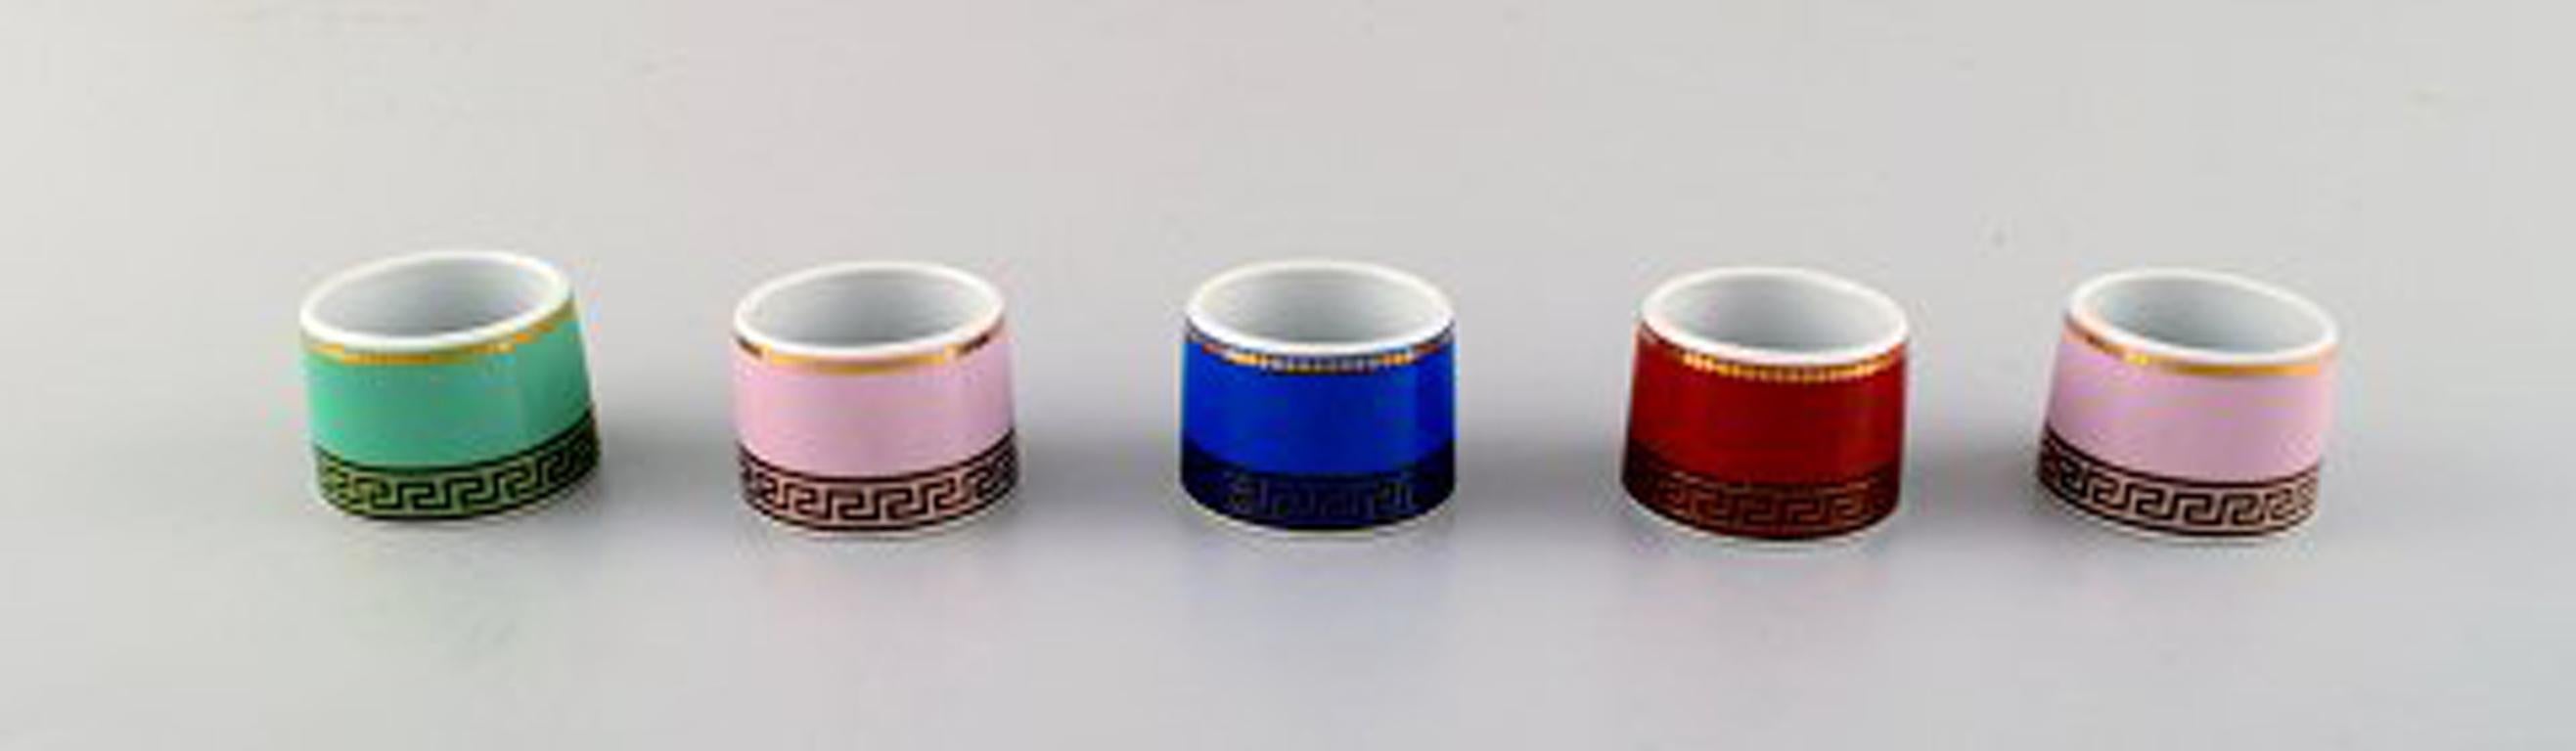 Gianni Versace for Rosenthal. 5 napkin rings. Stylistic style.
In perfect condition.
Measures: 4.5 cm x 3.2 cm
Stamped.